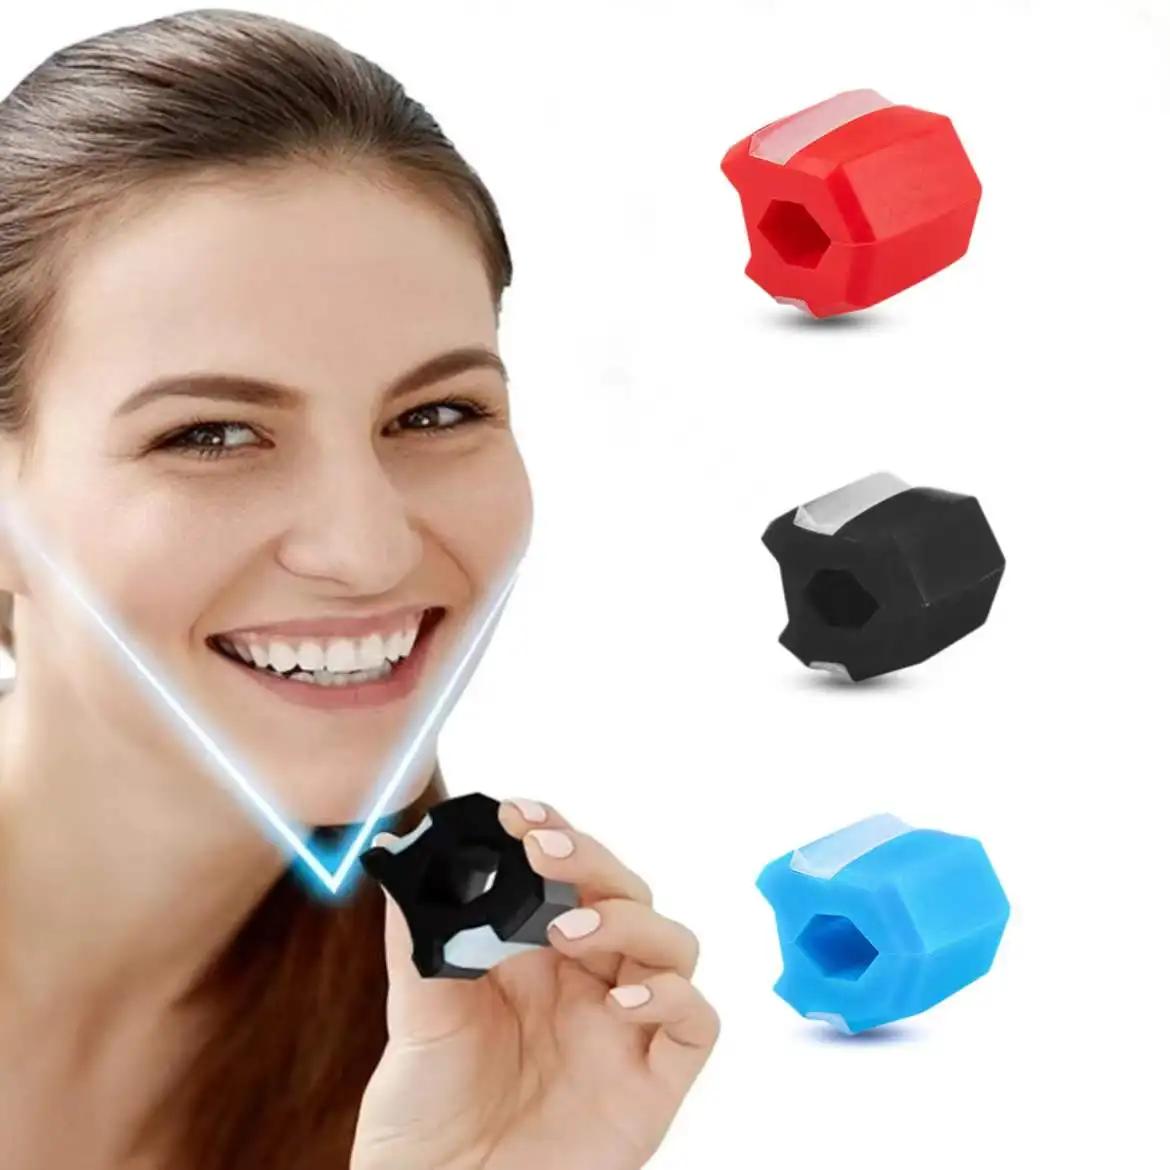 Face Shaper Facial Jaw Exerciser Fitness Ball Muscle Training Toning Lifting Jaw 